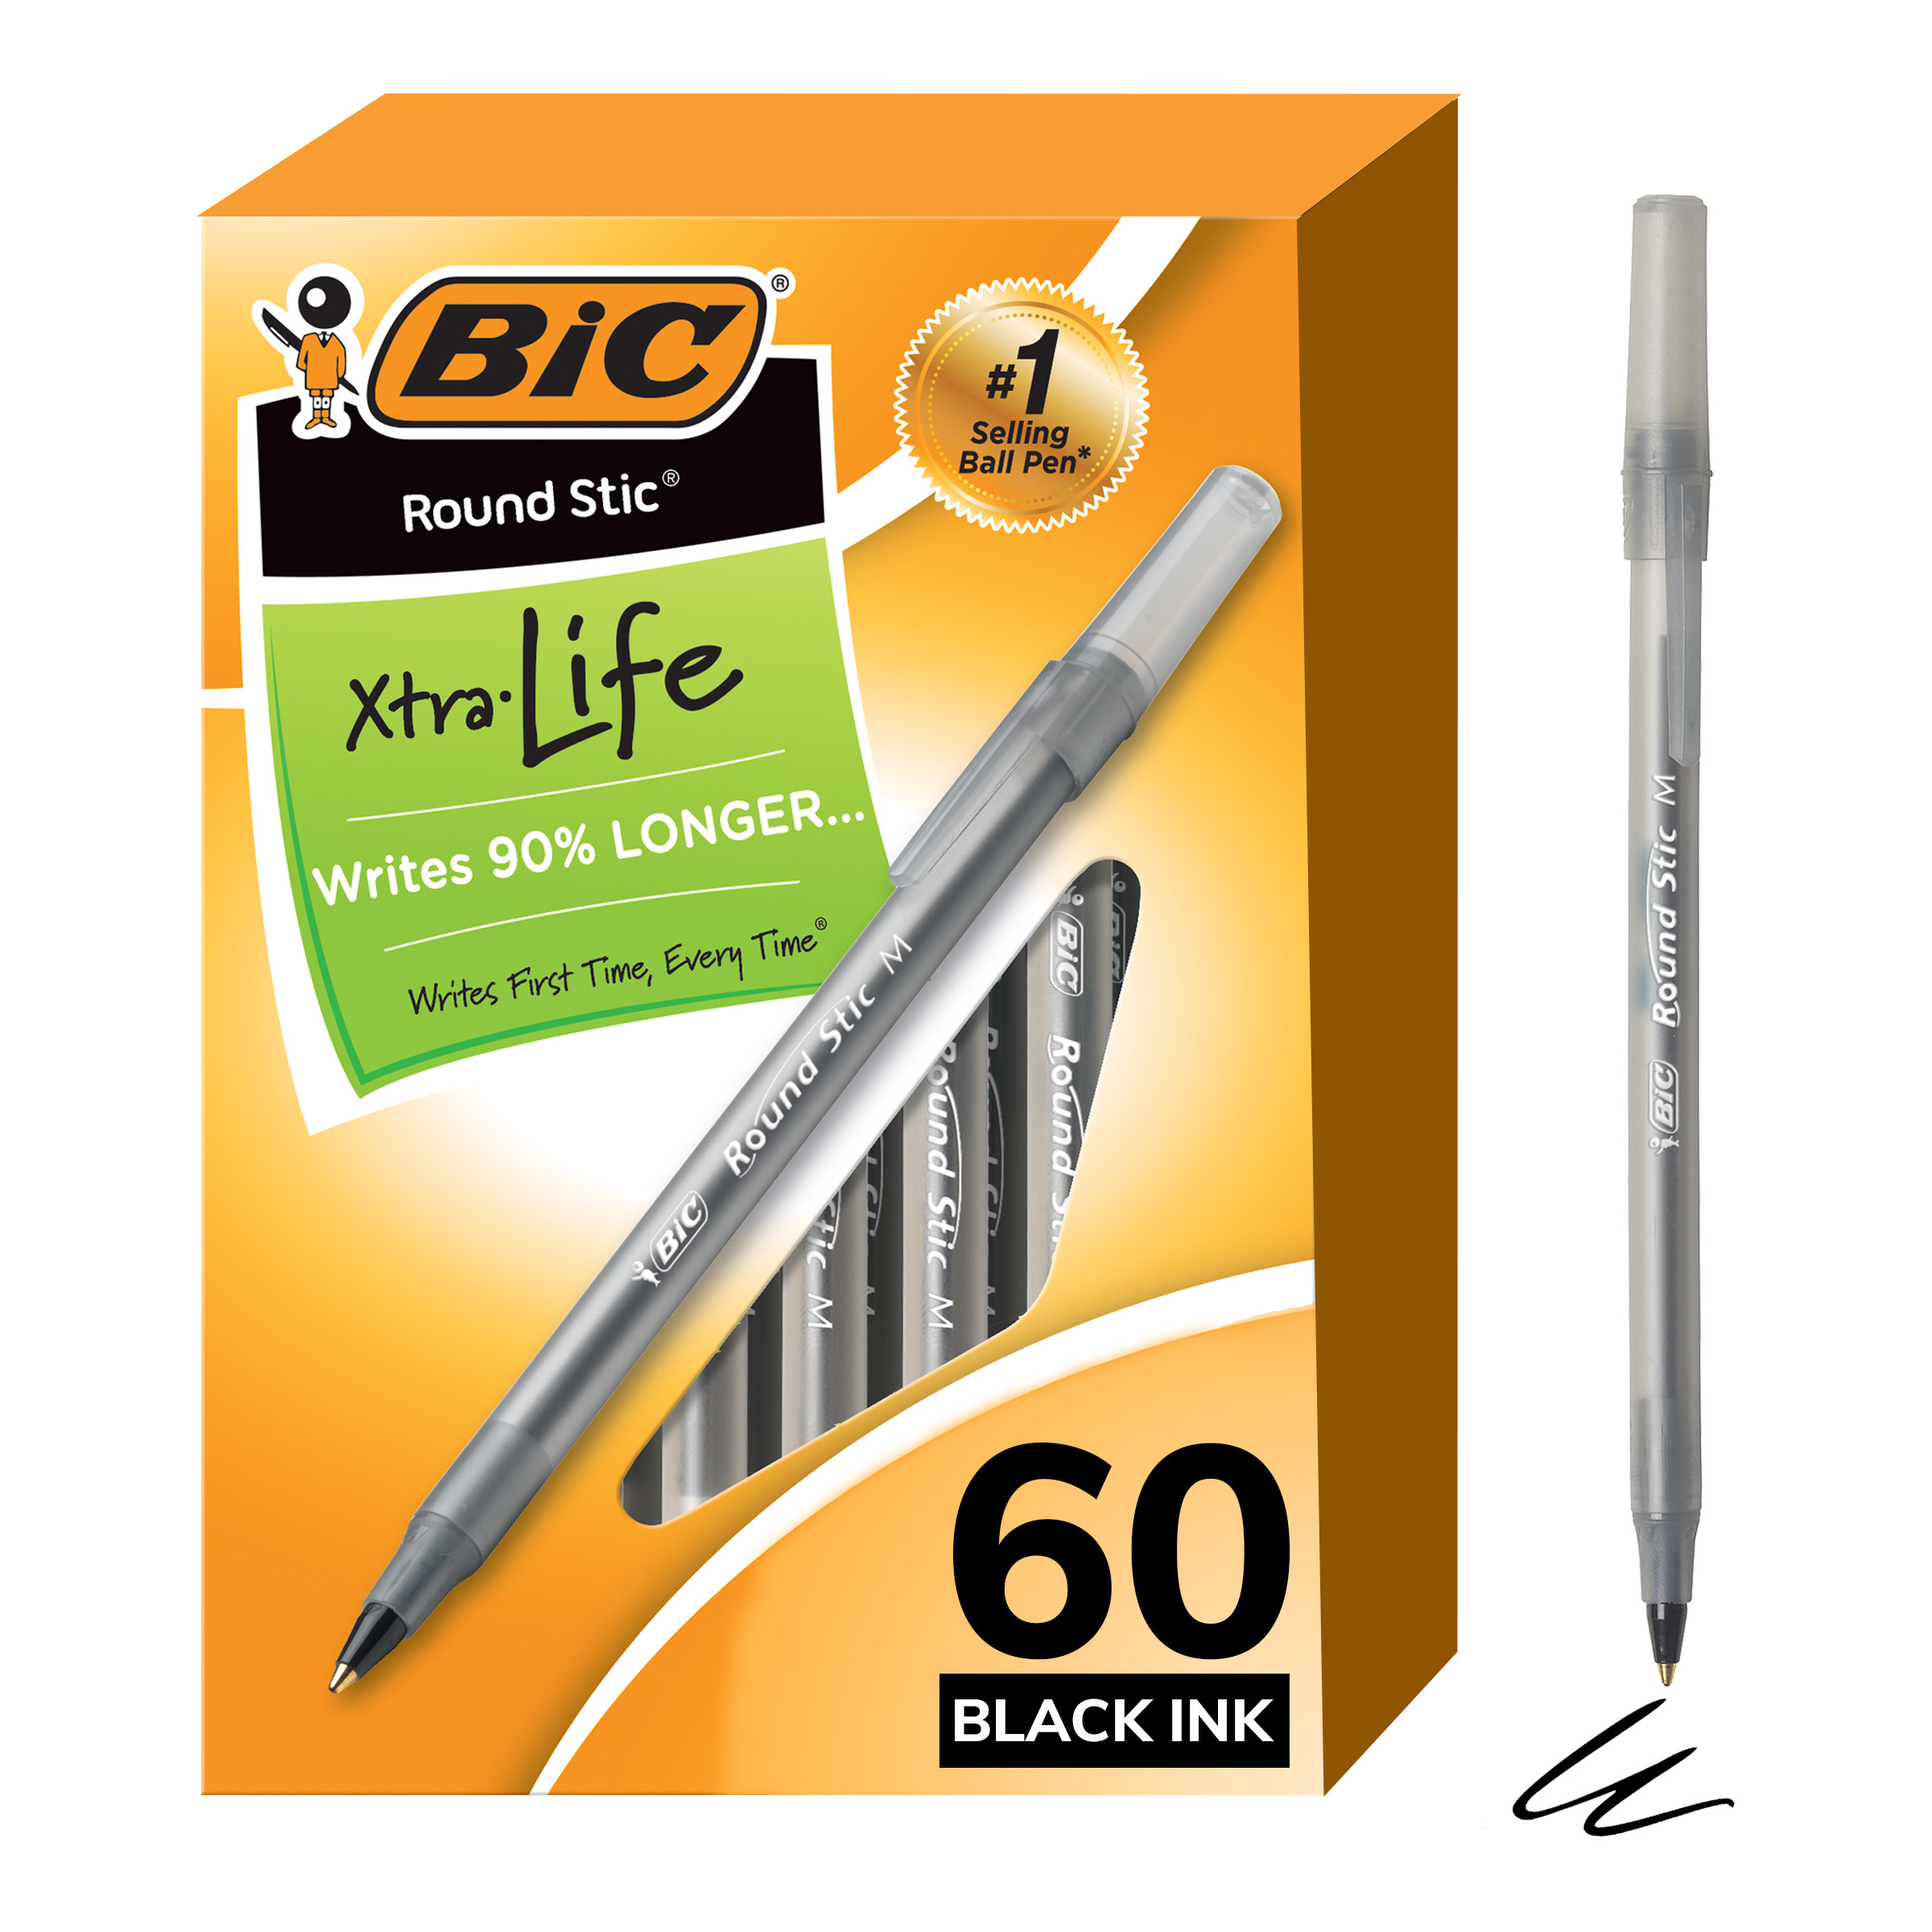 BIC Round Stic Xtra Life Ballpoint Pens, Medium Point, 1.0 mm, Black Ink, Pack of 60 - image 1 of 9